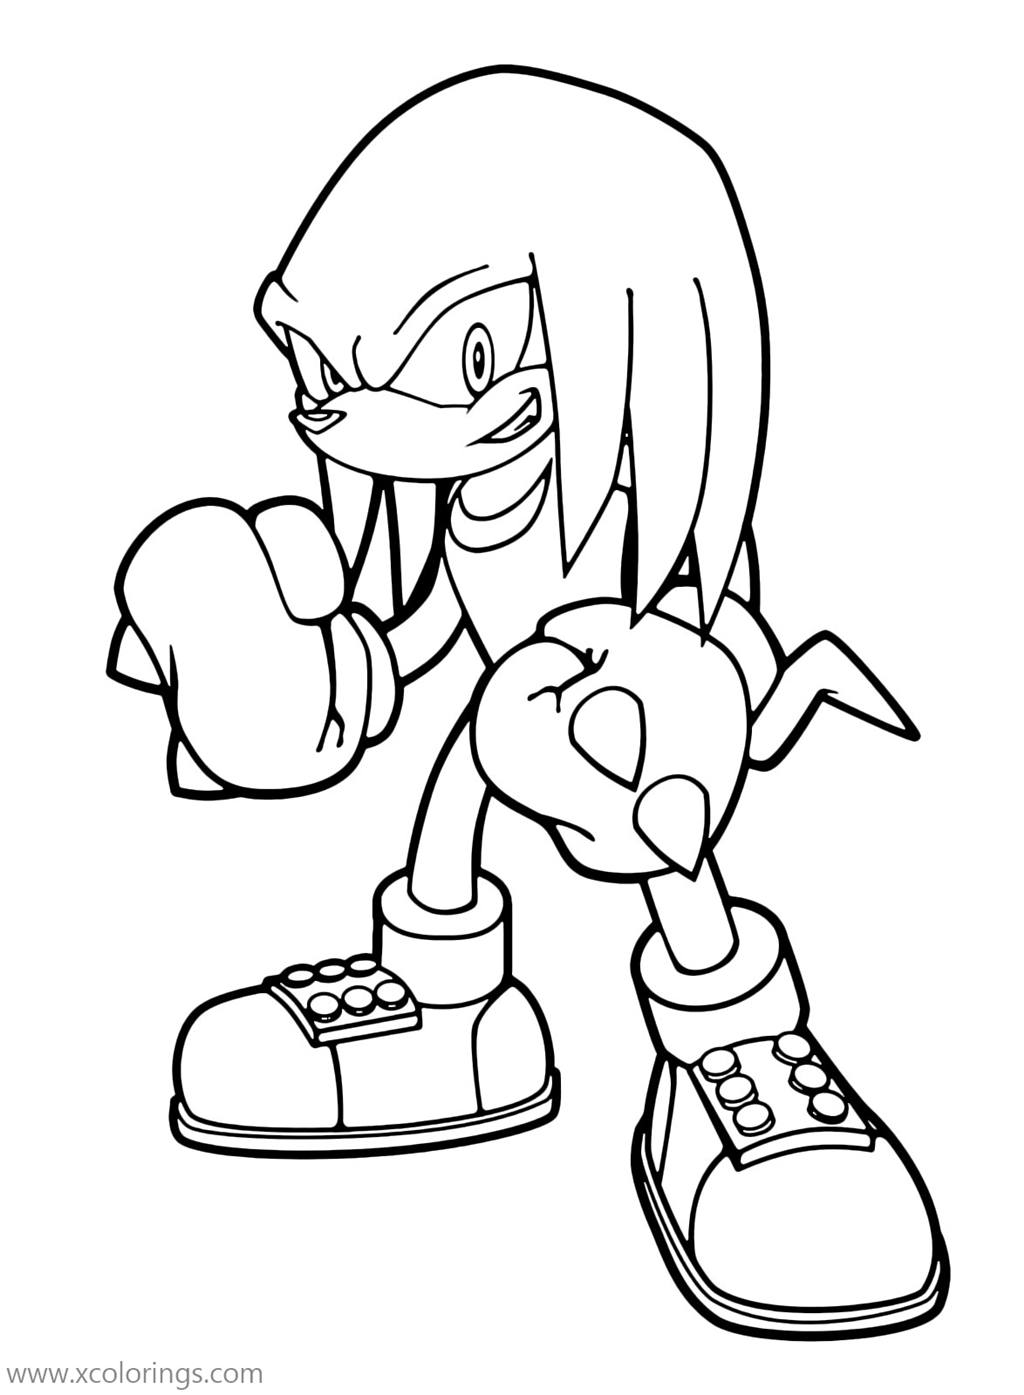 Free Knuckles Ready to Beat Coloring Page printable